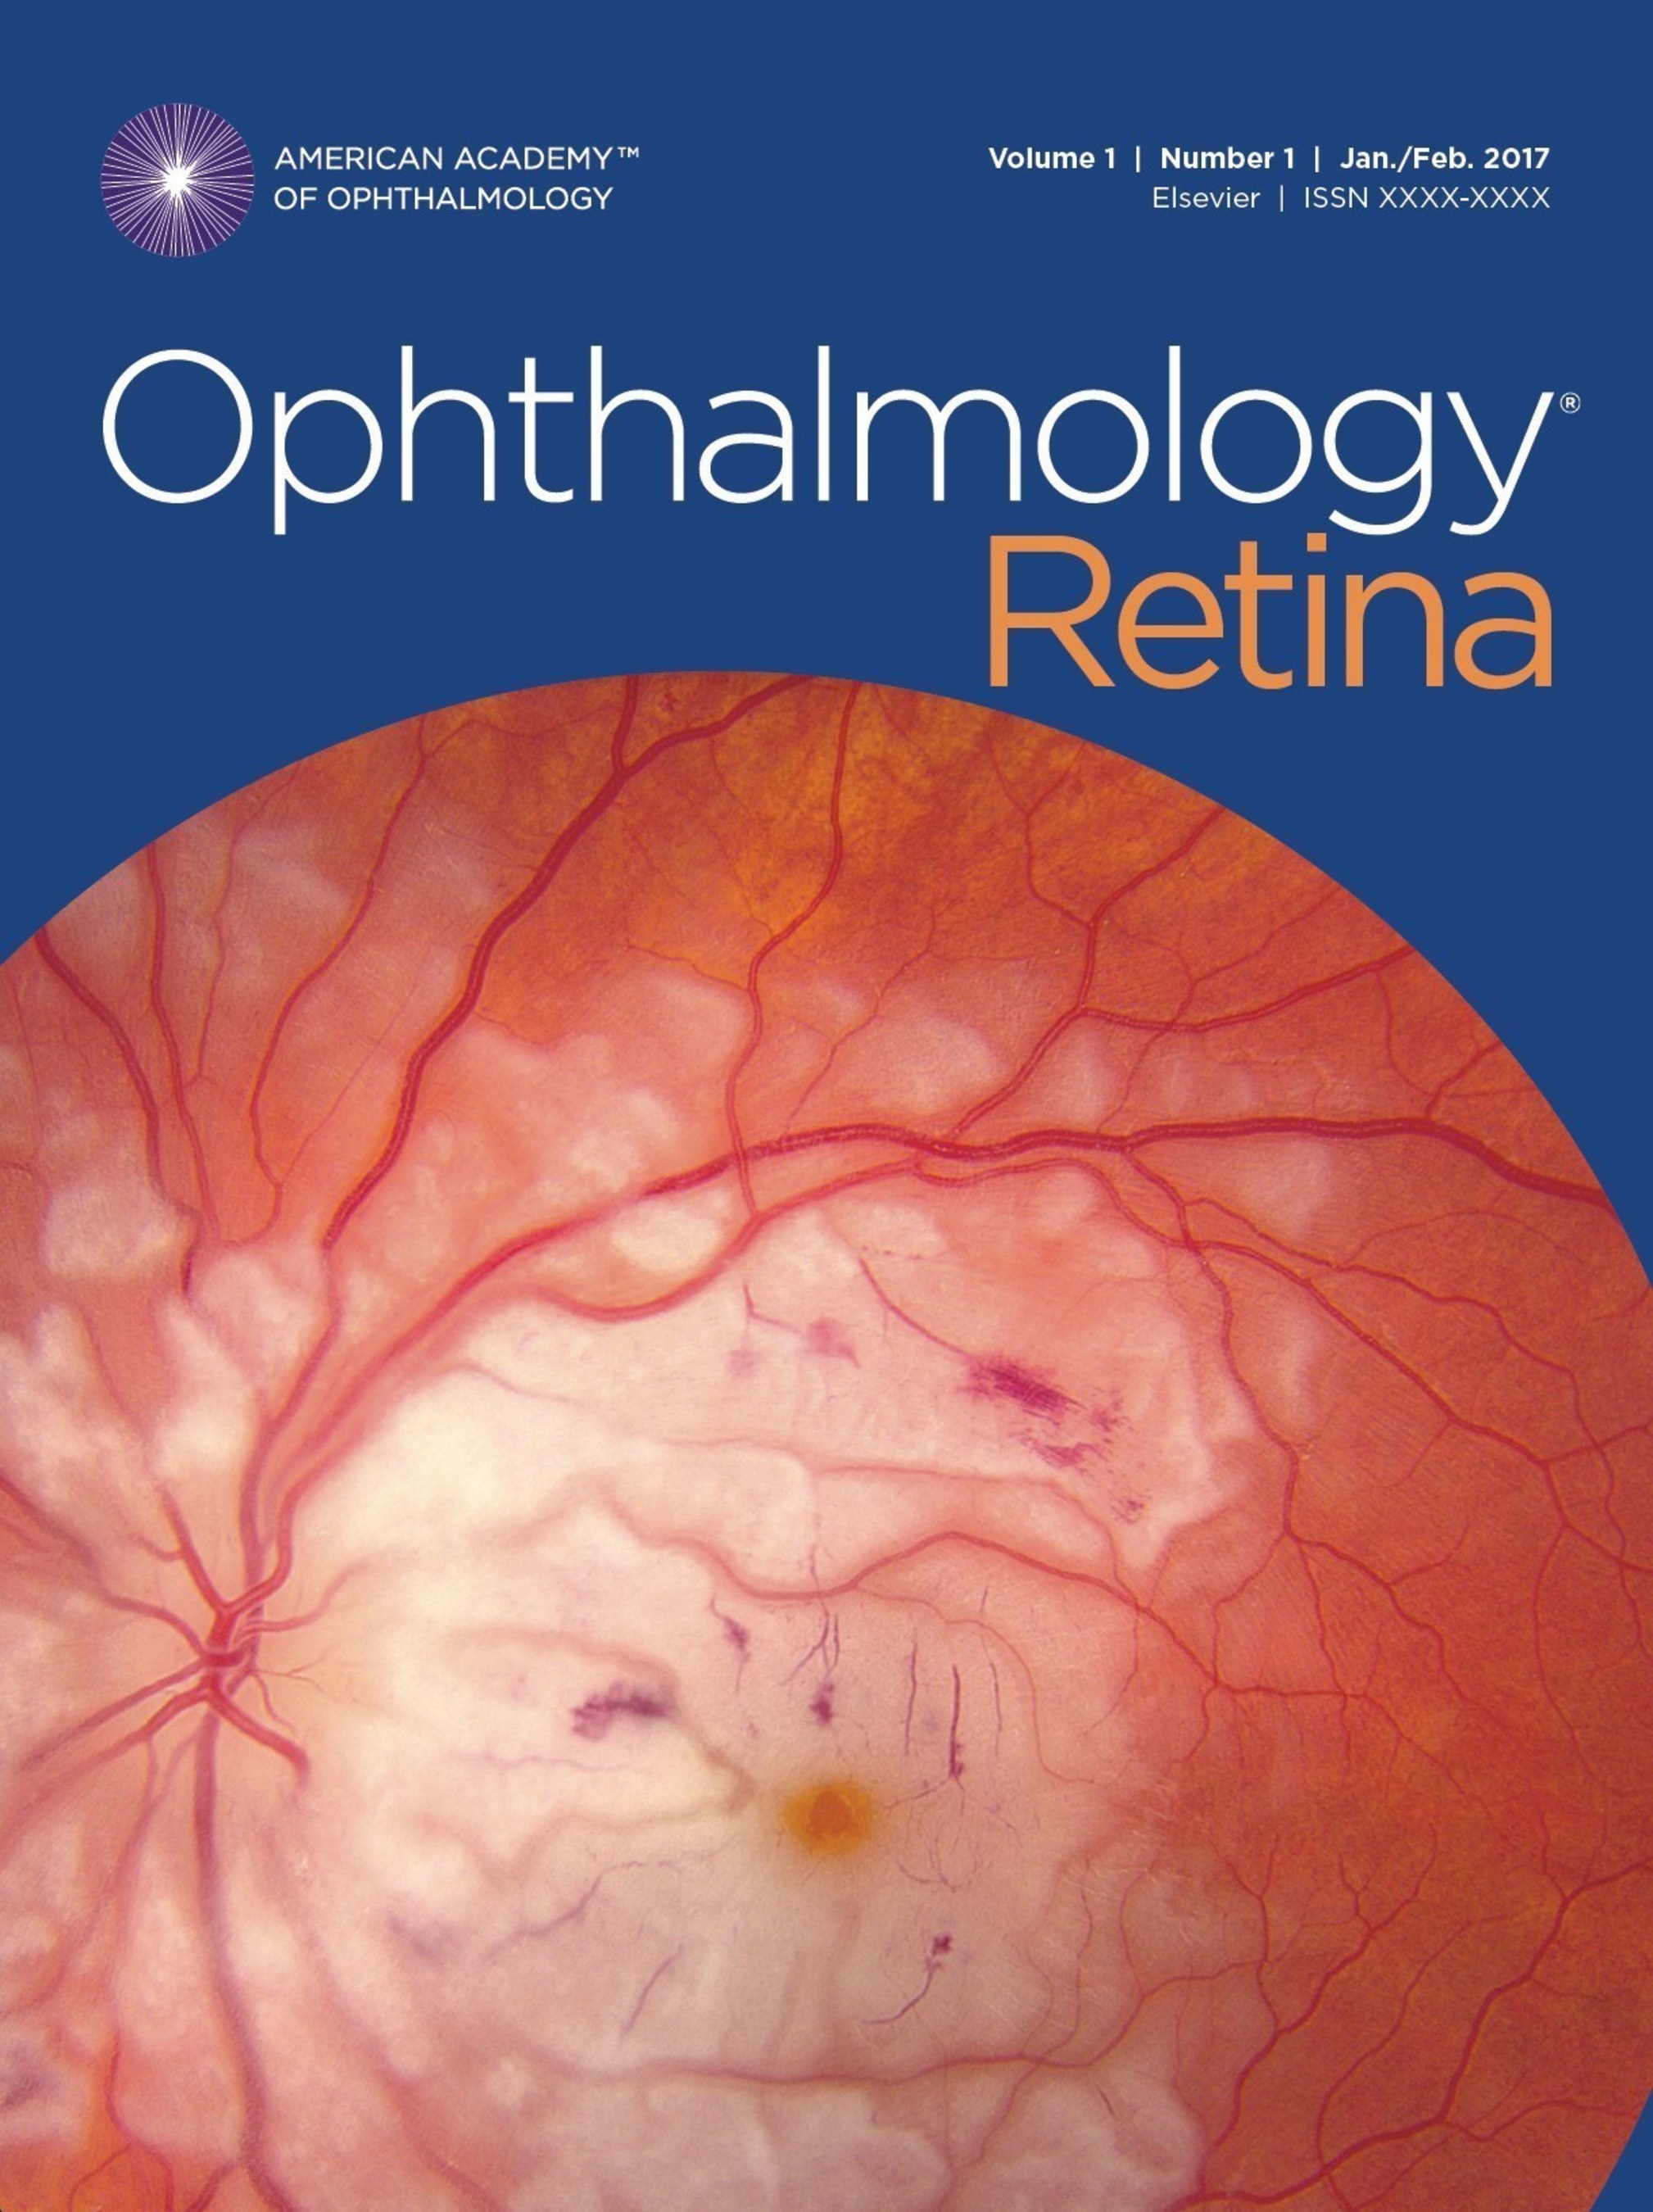 American Academy of Ophthalmology to Launch New Scientific Journal